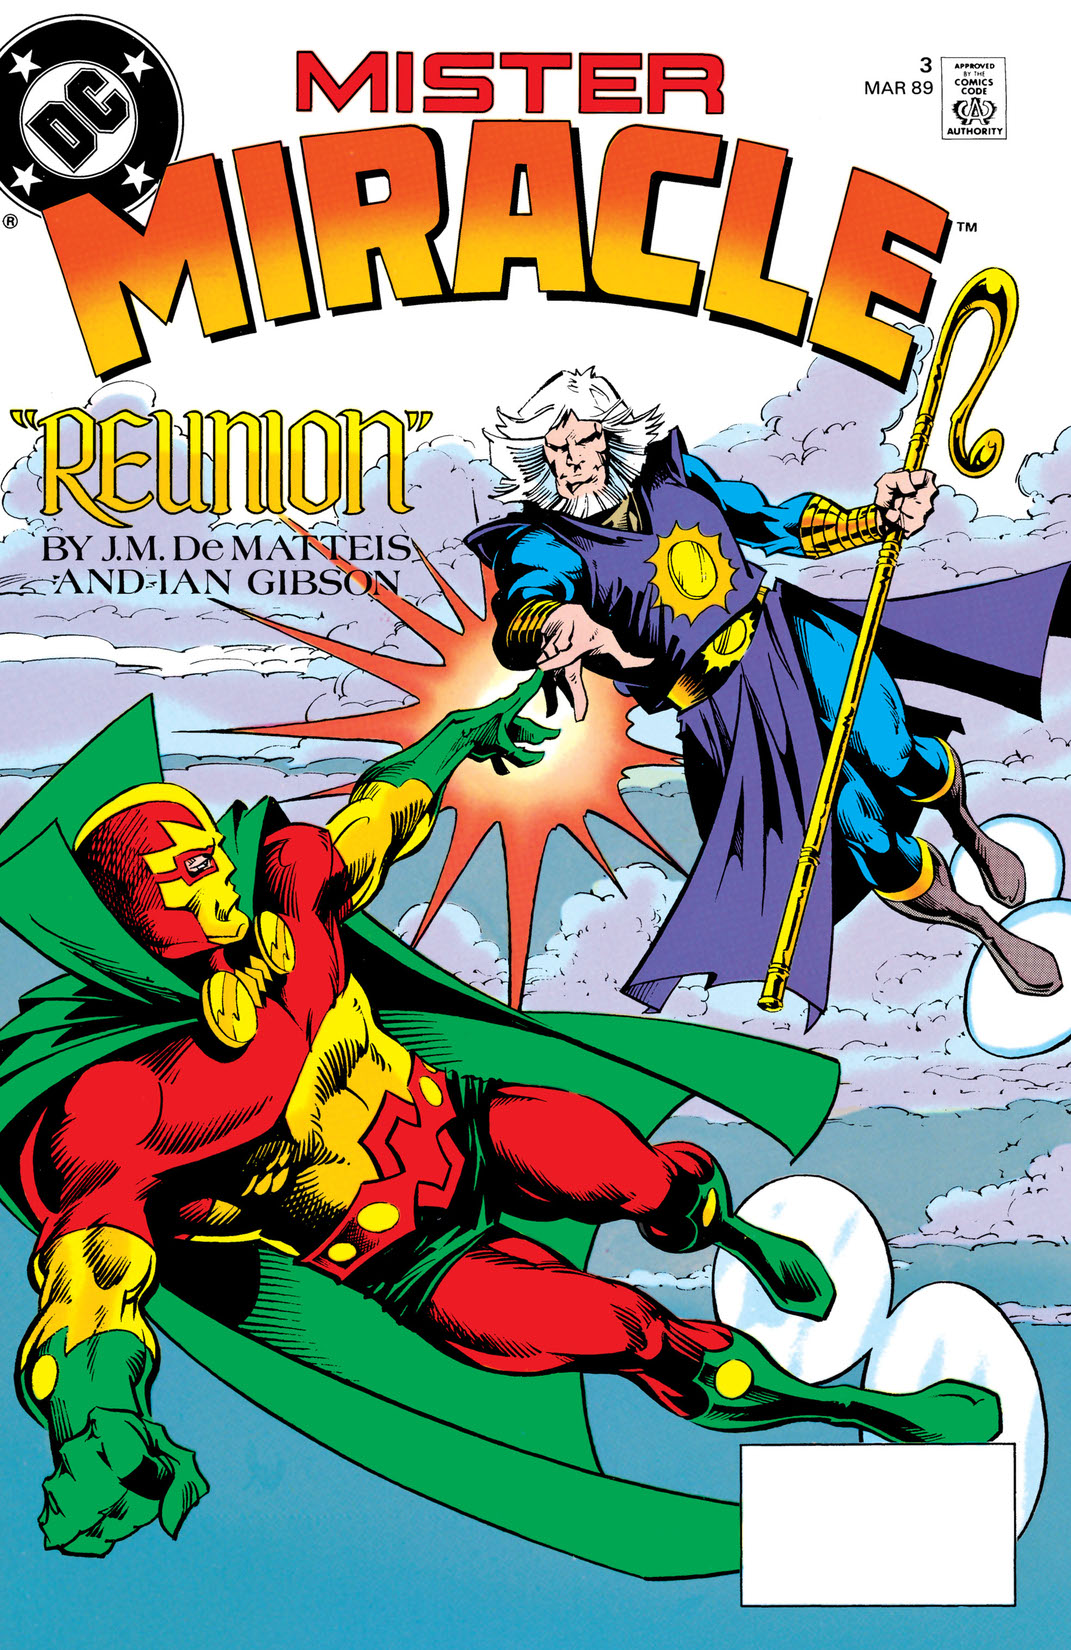 Mister Miracle (1988-) #3 preview images